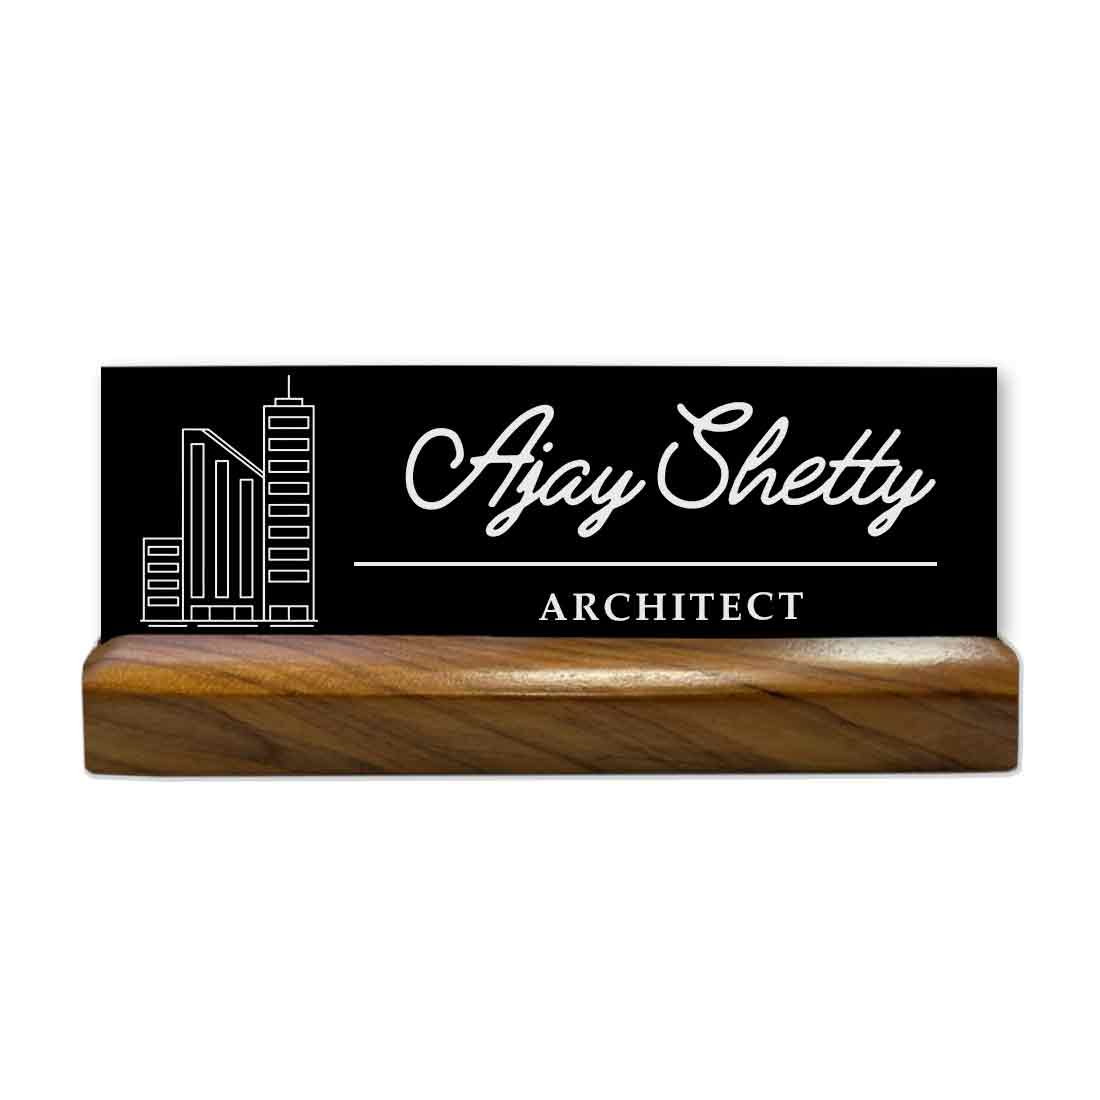 Personalized Name Plate For Desk